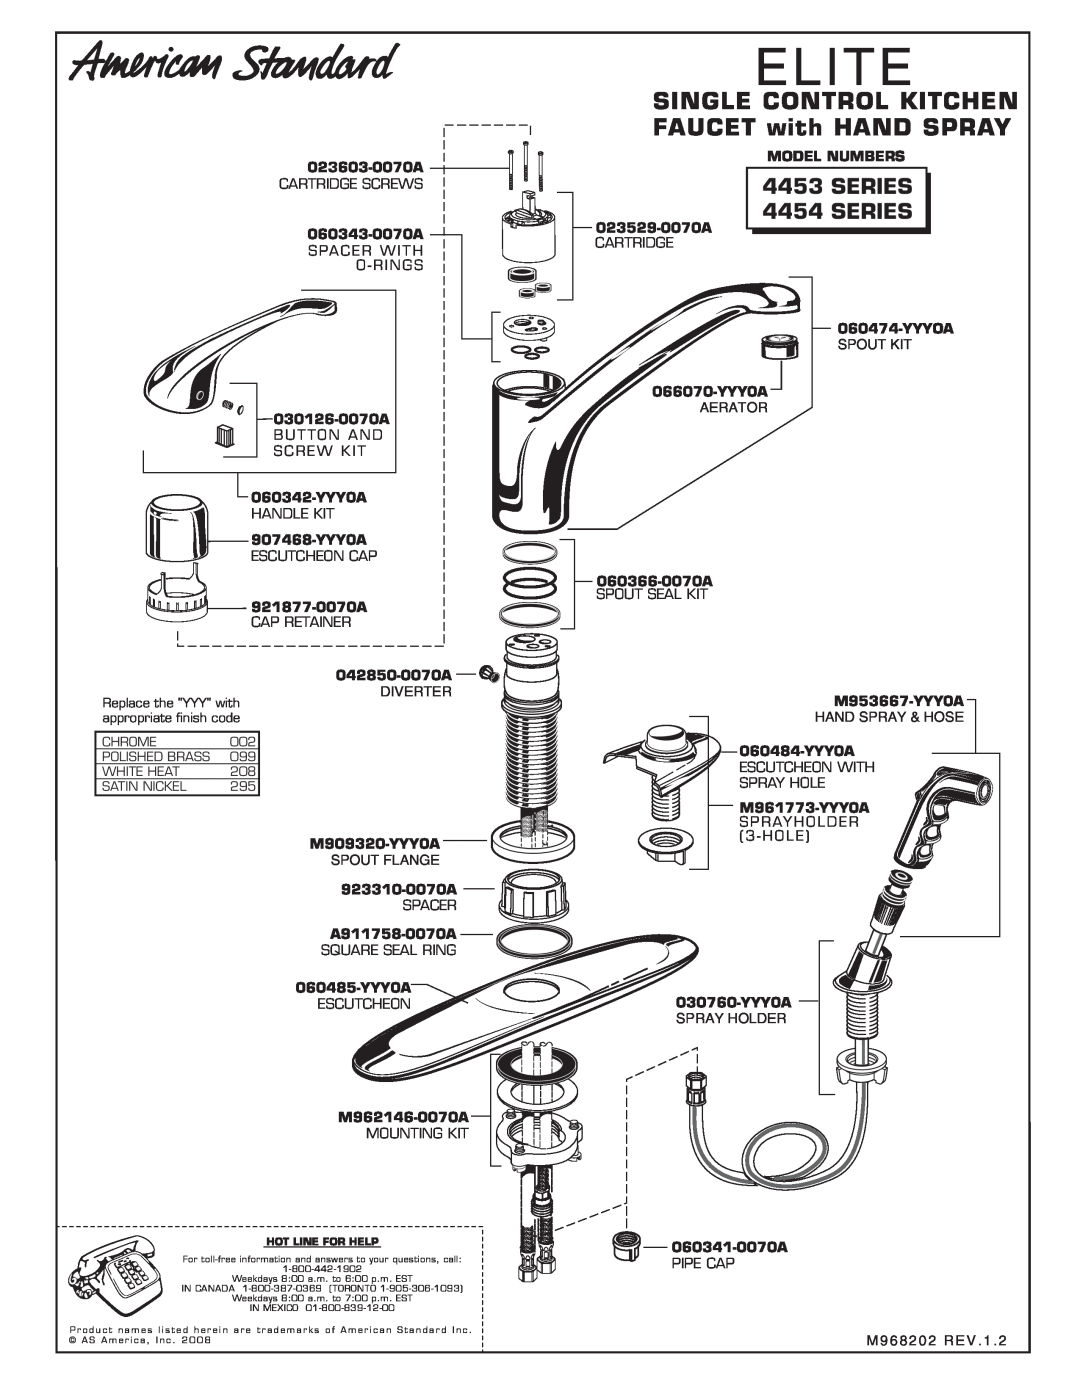 American Standard 4453 SERIES manual Elite, SINGLE CONTROL KITCHEN FAUCET with HAND SPRAY, SERIES 4454 SERIES 